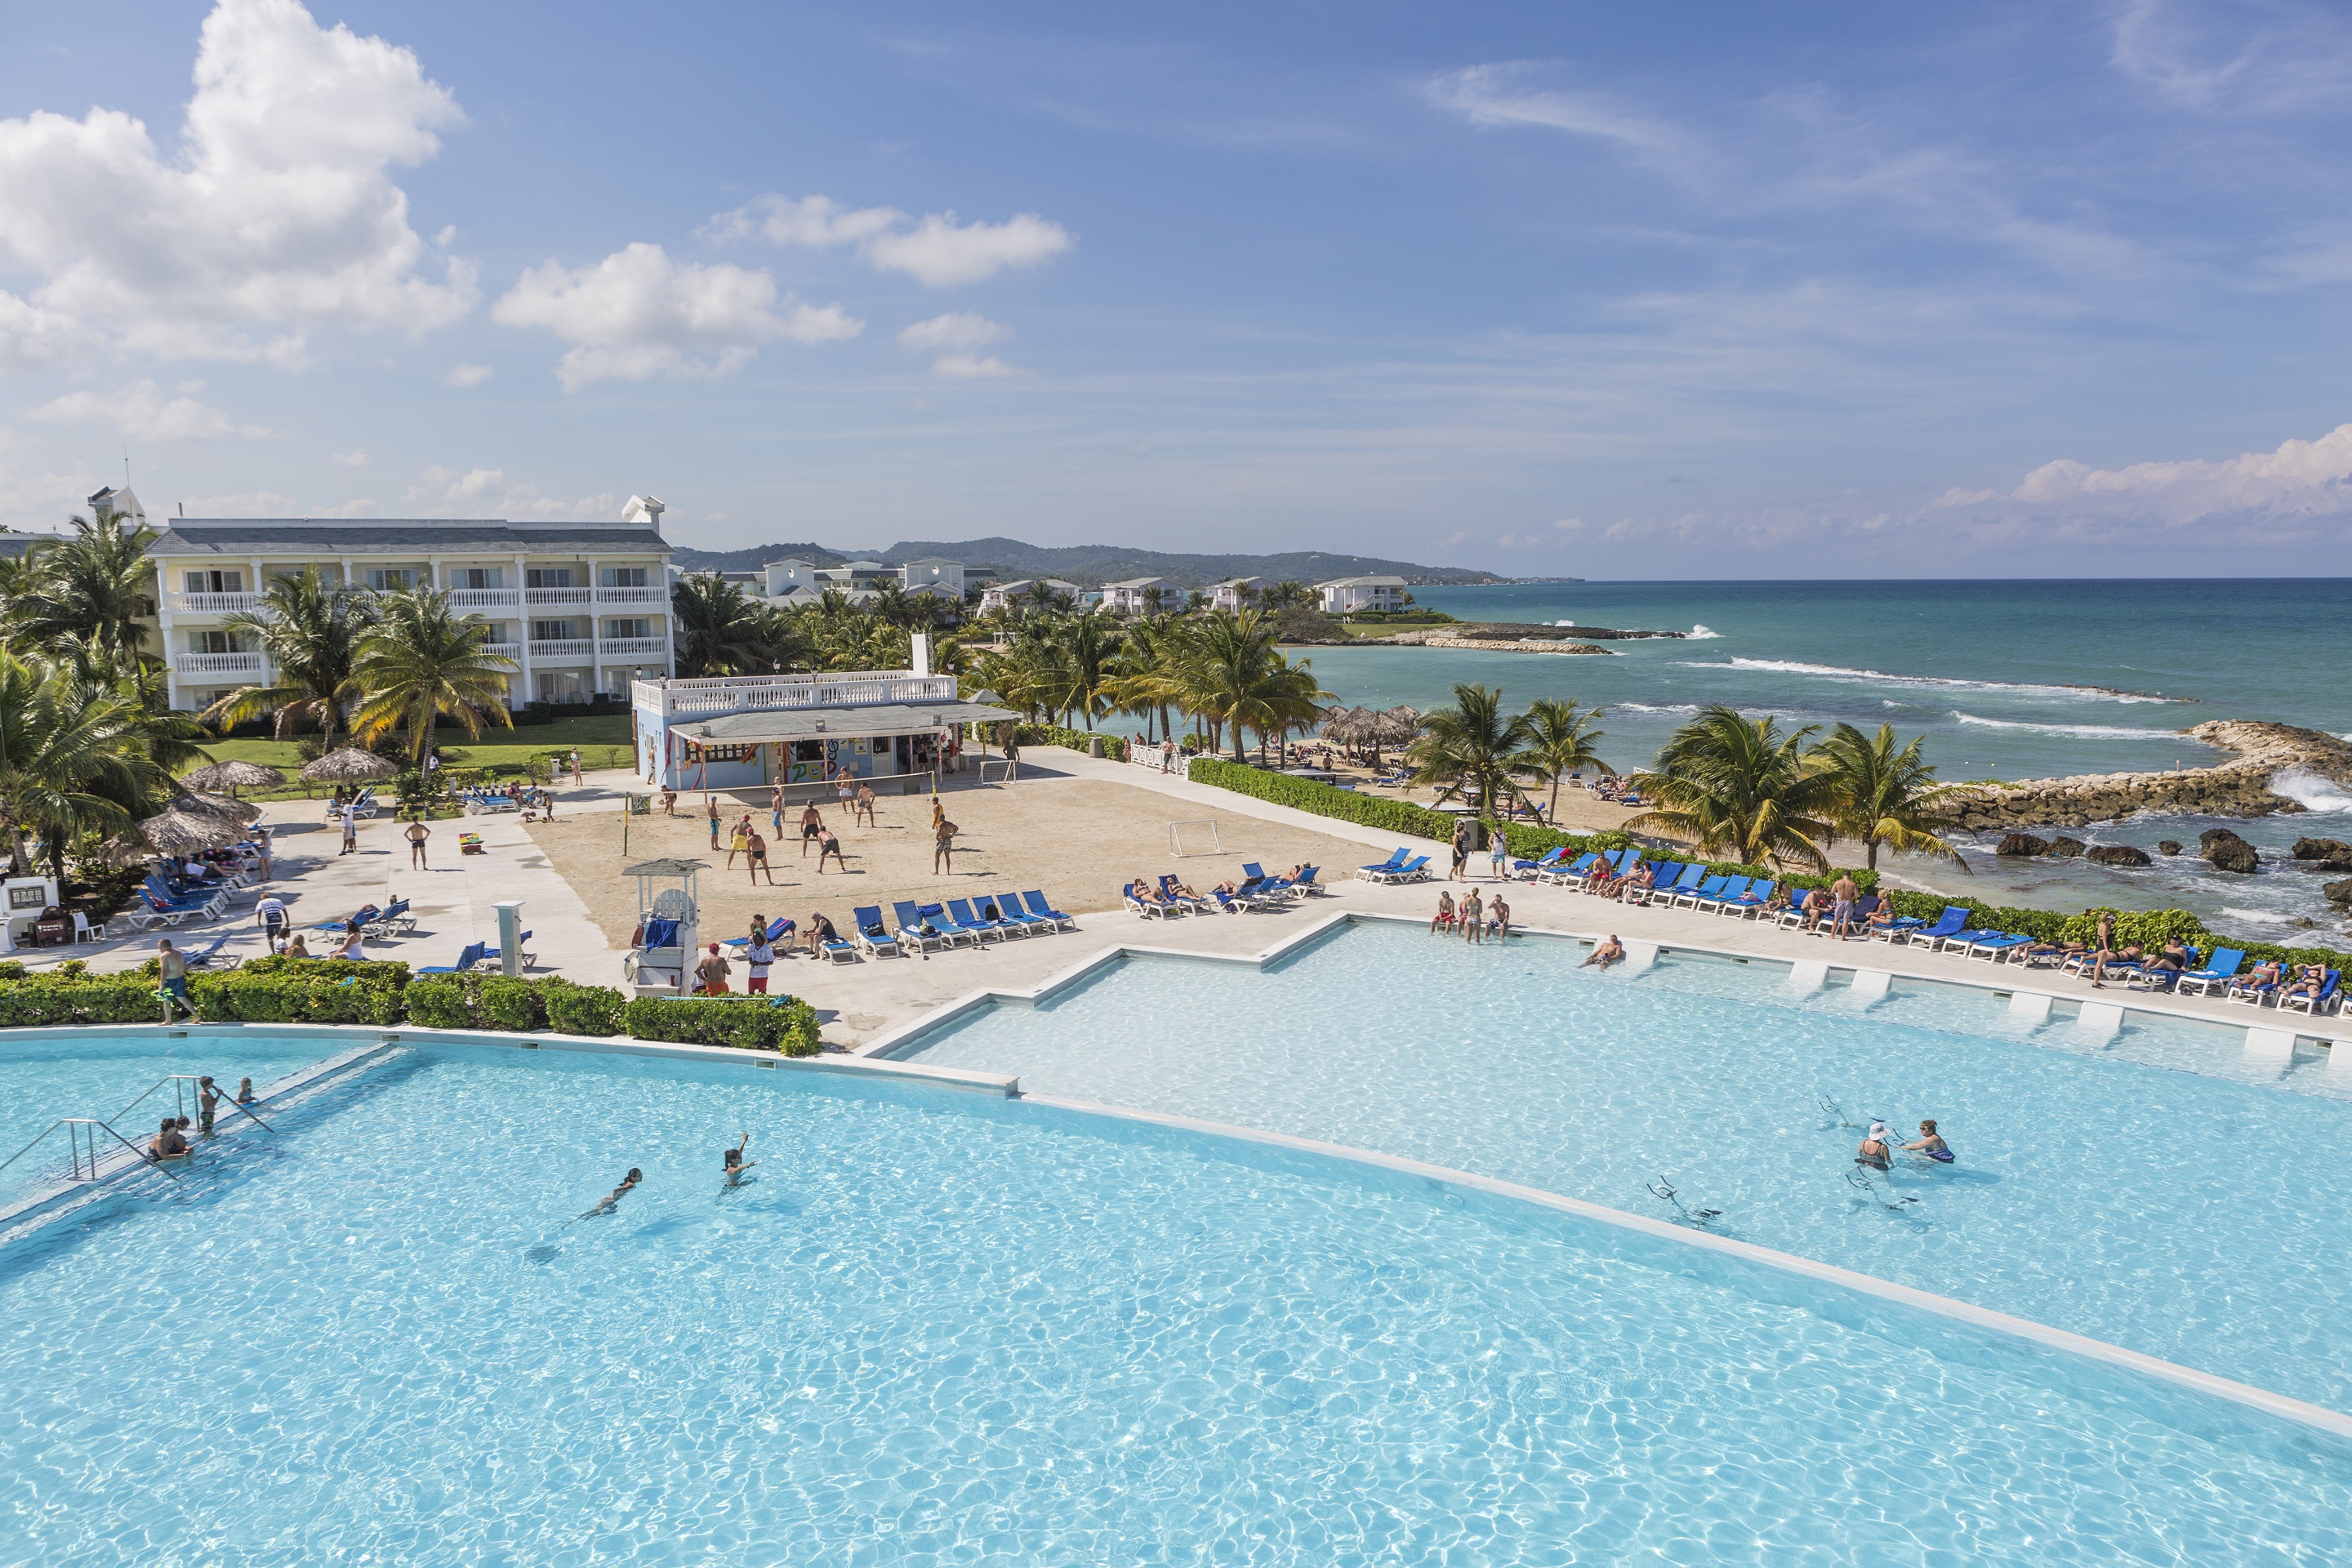 Easter family of 4 Jamaica and splash around in one of the largest pools in the Caribbean!